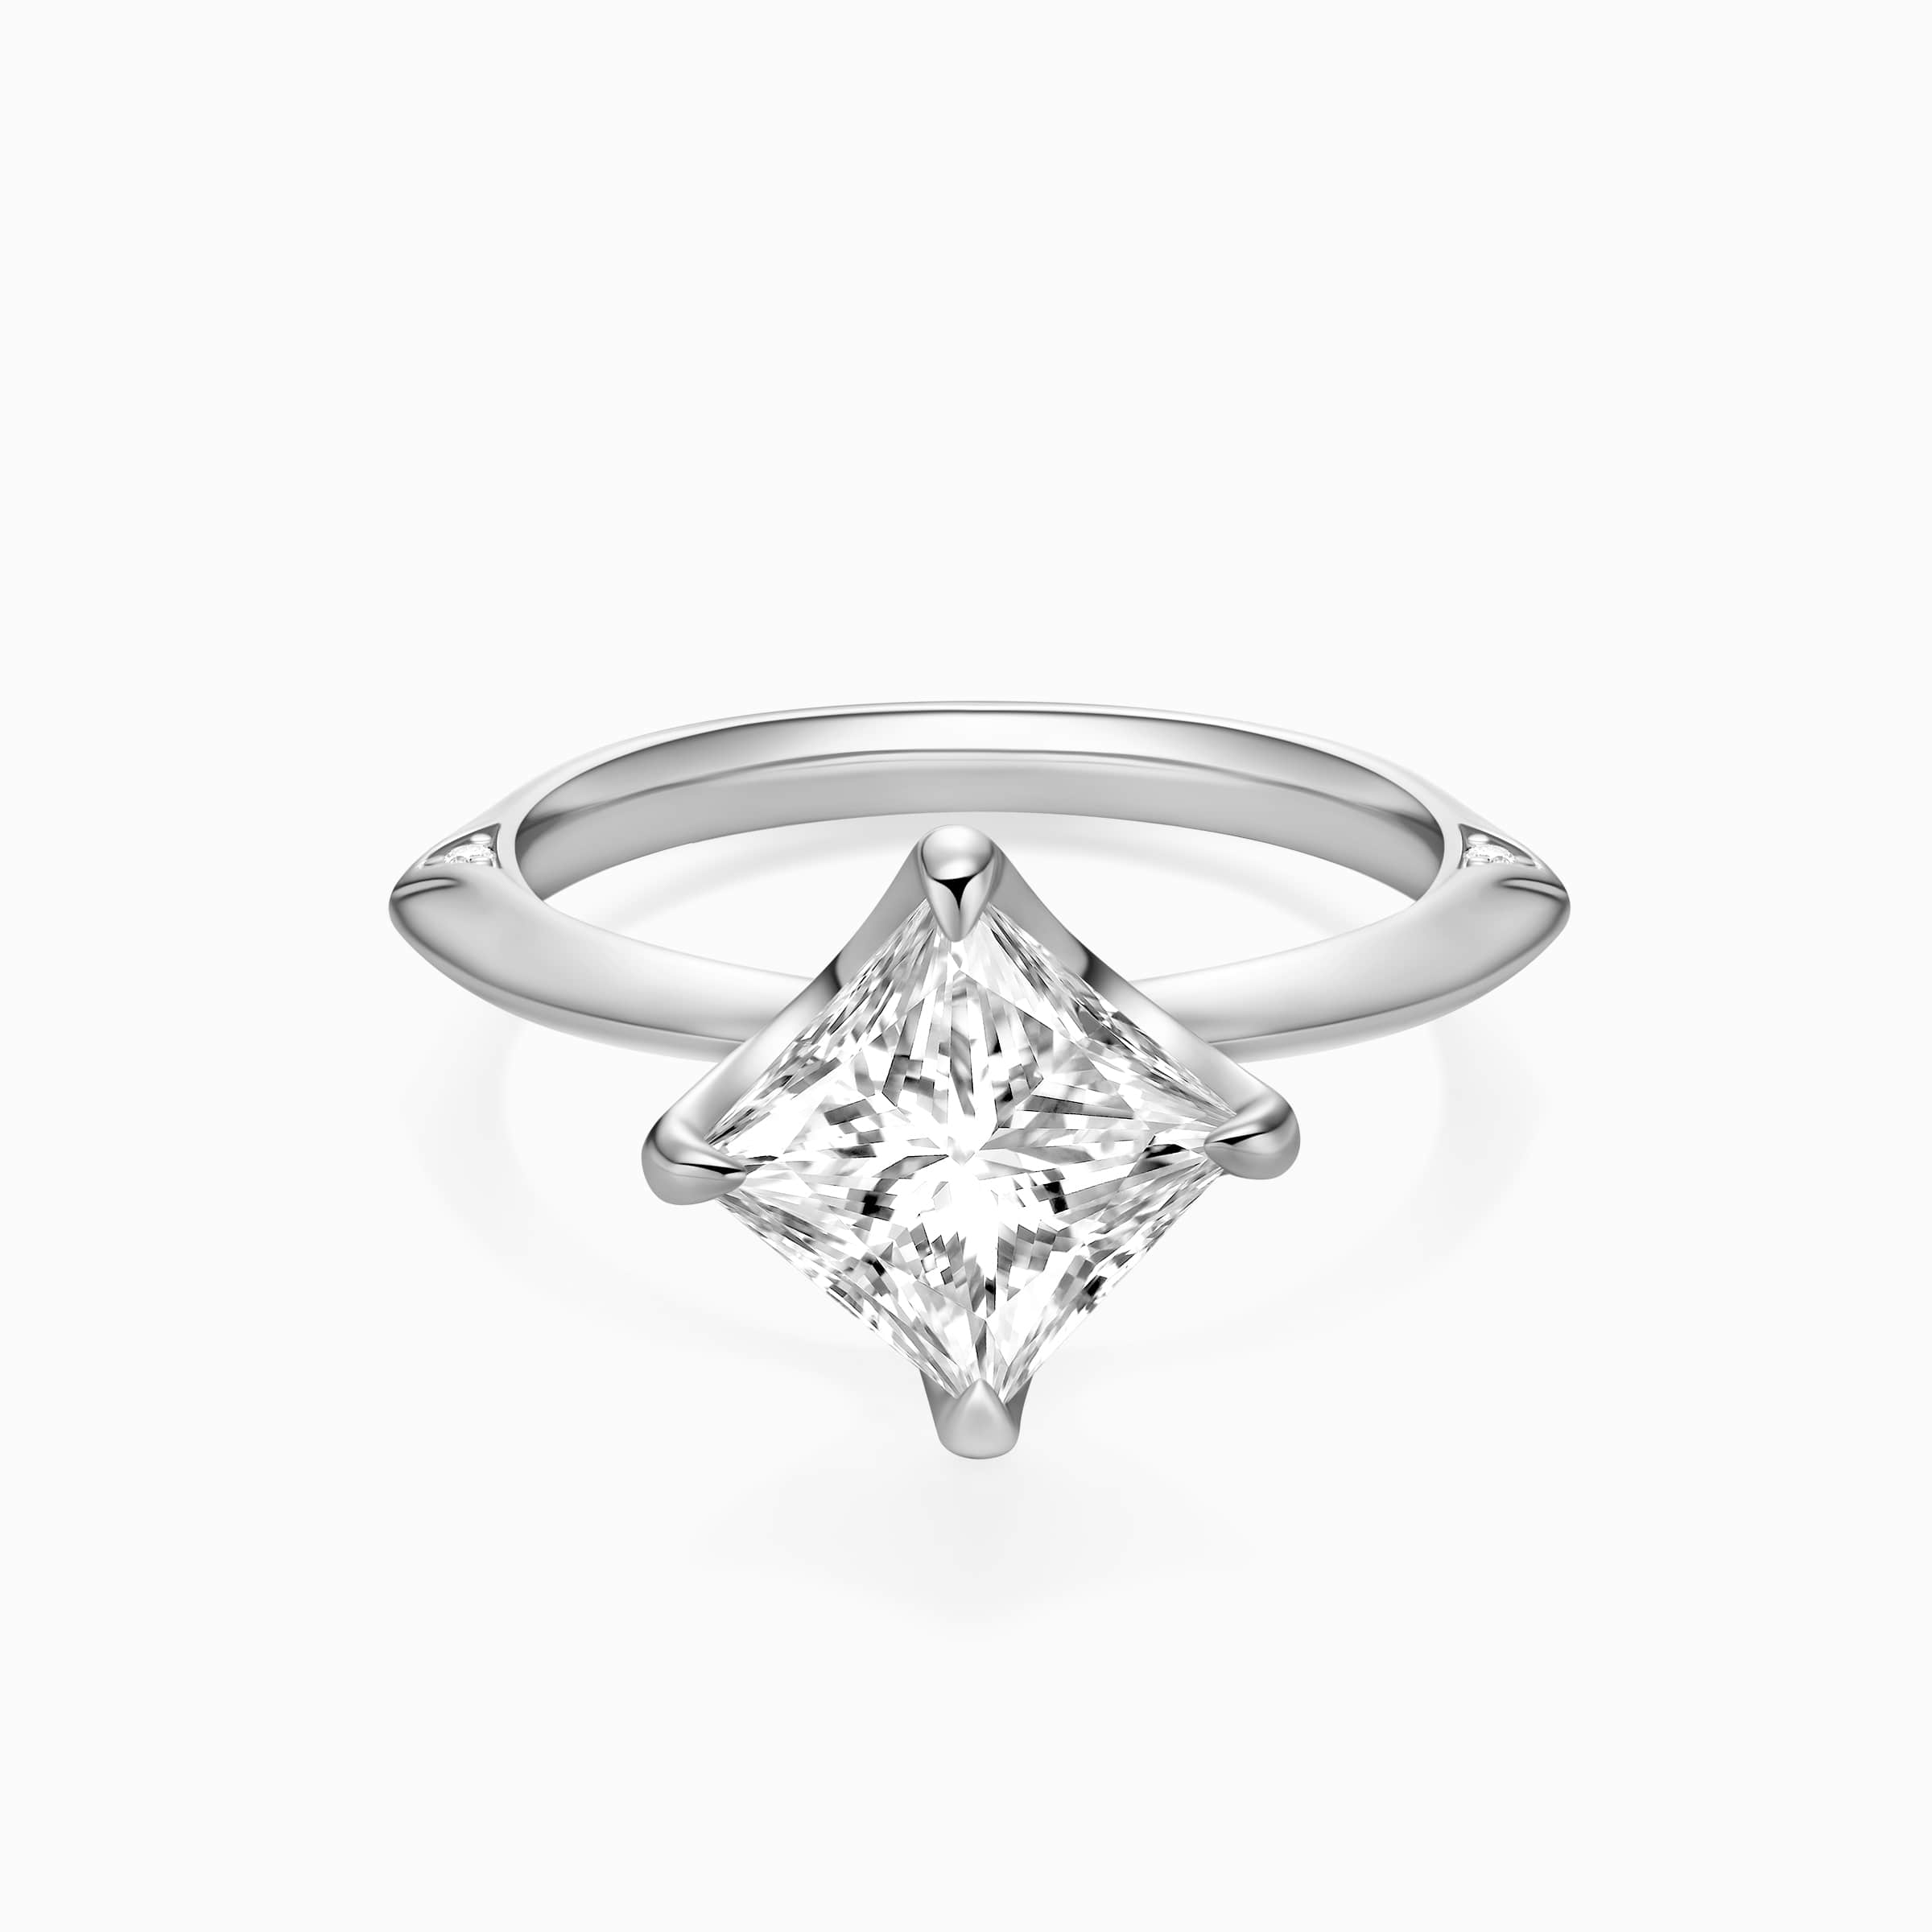 Darry Ring solitaire princess cut engagement ring front view